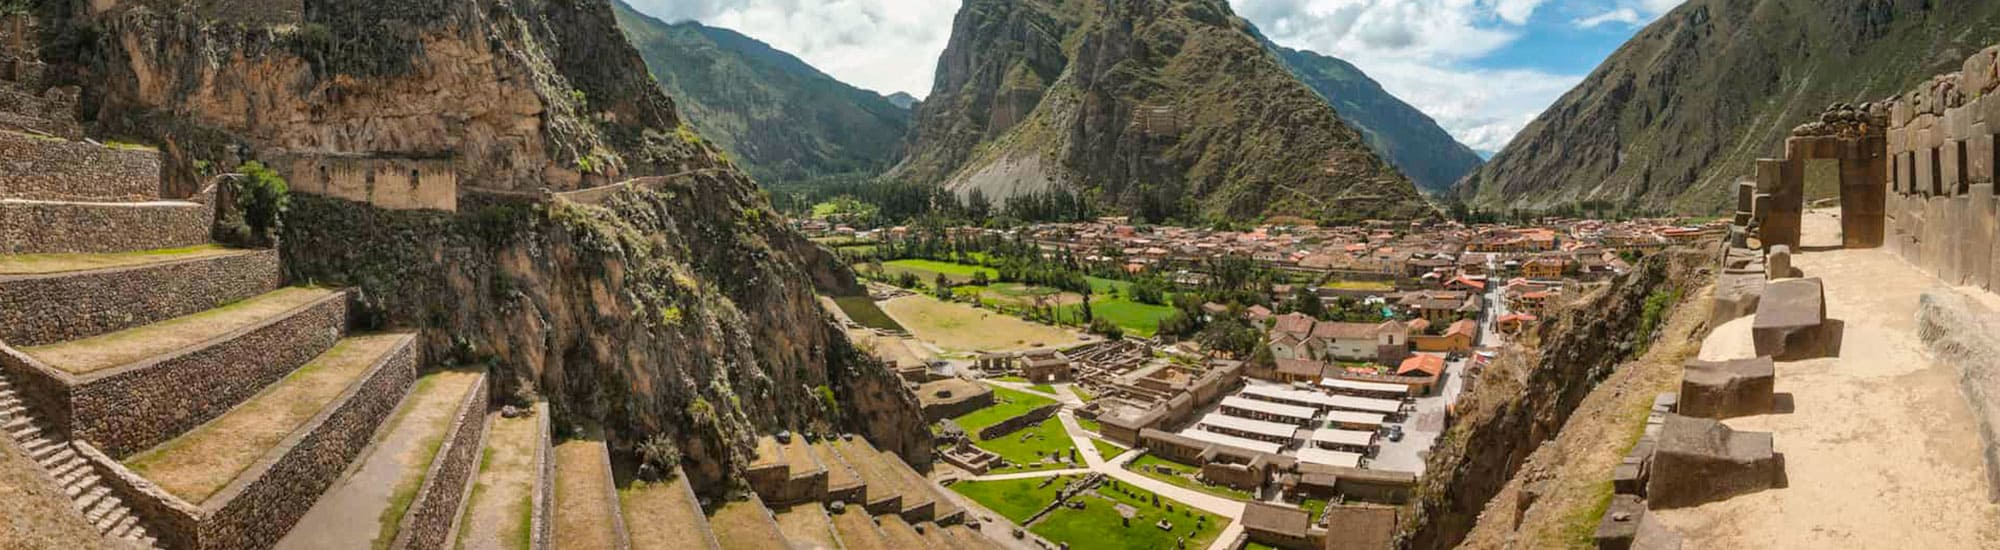 Sacred Valley tours from Cusco -Peru